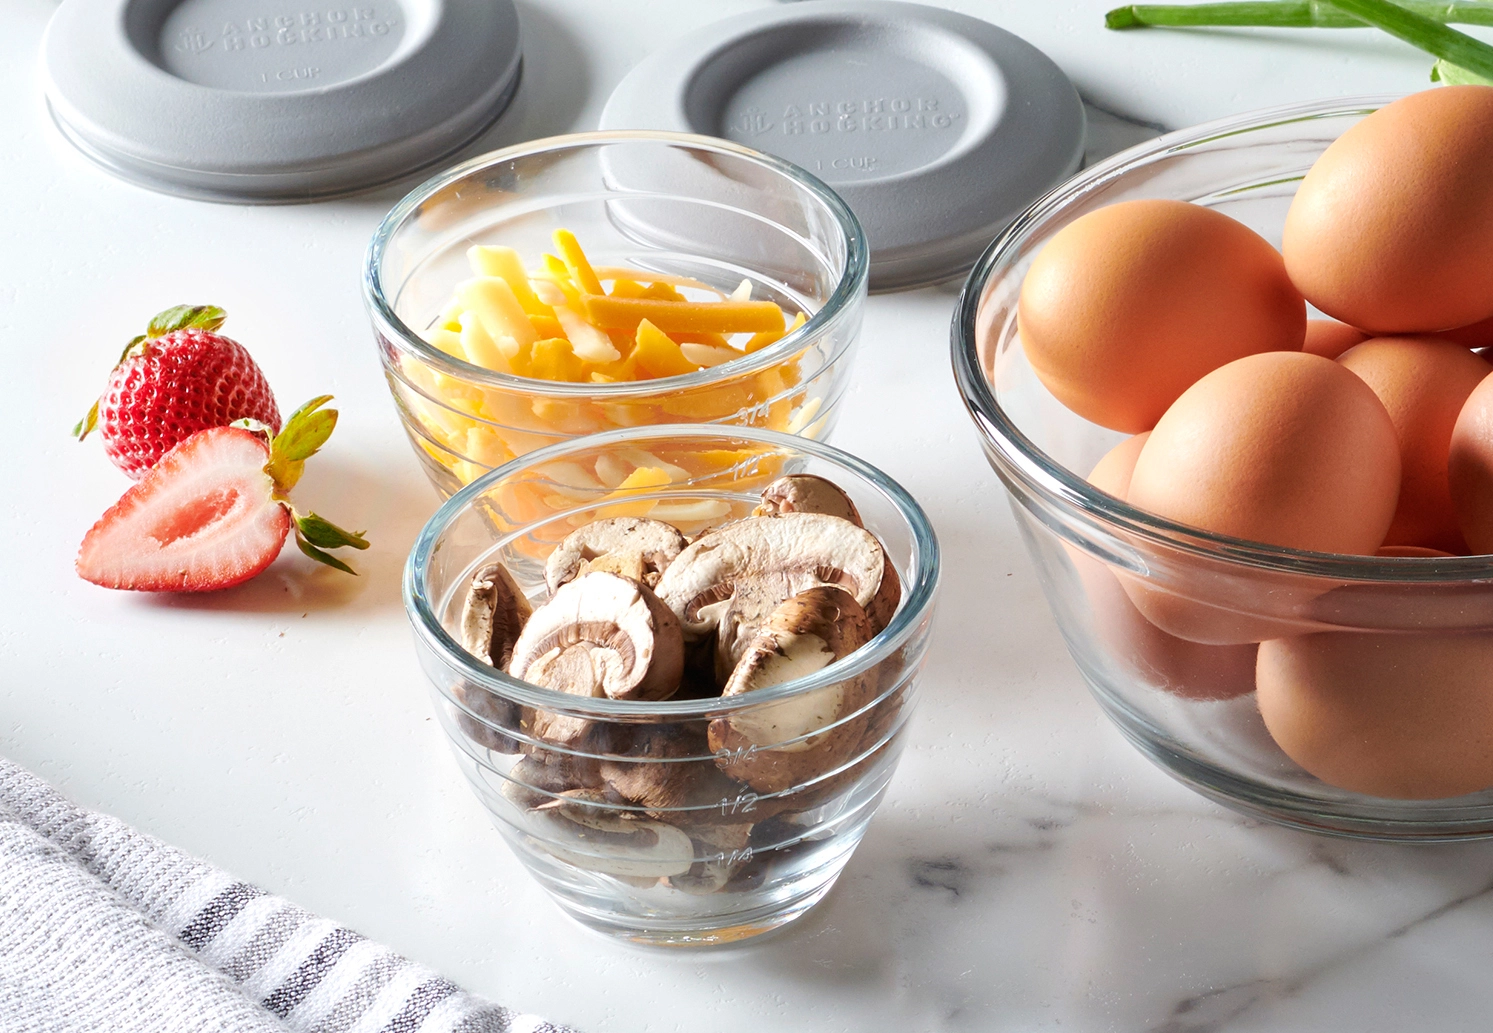 5 Must Haves For The Perfect Pantry Breakfast - 4 in 1 Prep Bowls by Anchor Hocking